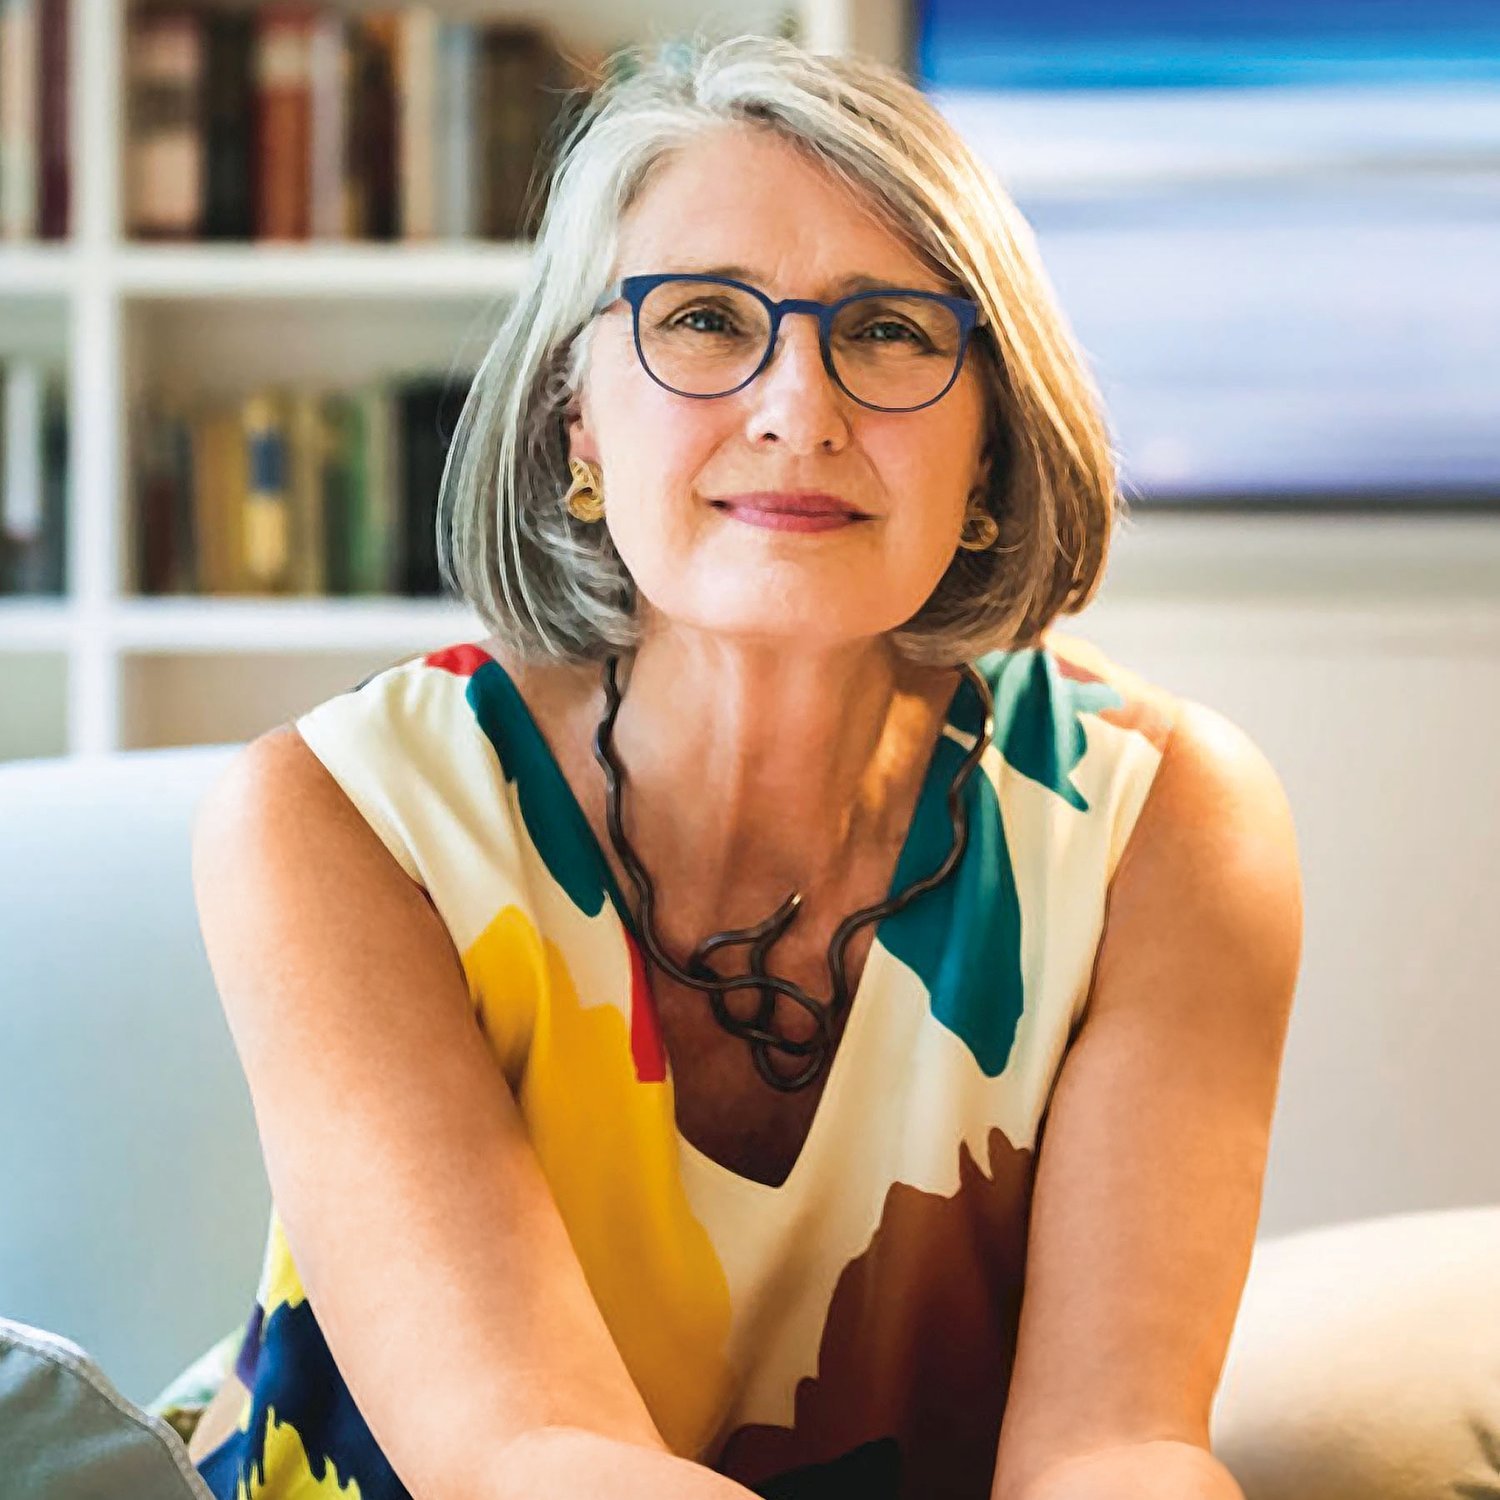 Featured authors at this year’s festival include mystery novelist Louise Penny, who will appear at an “All the Spoilers” ticketed breakfast for her avid fans.